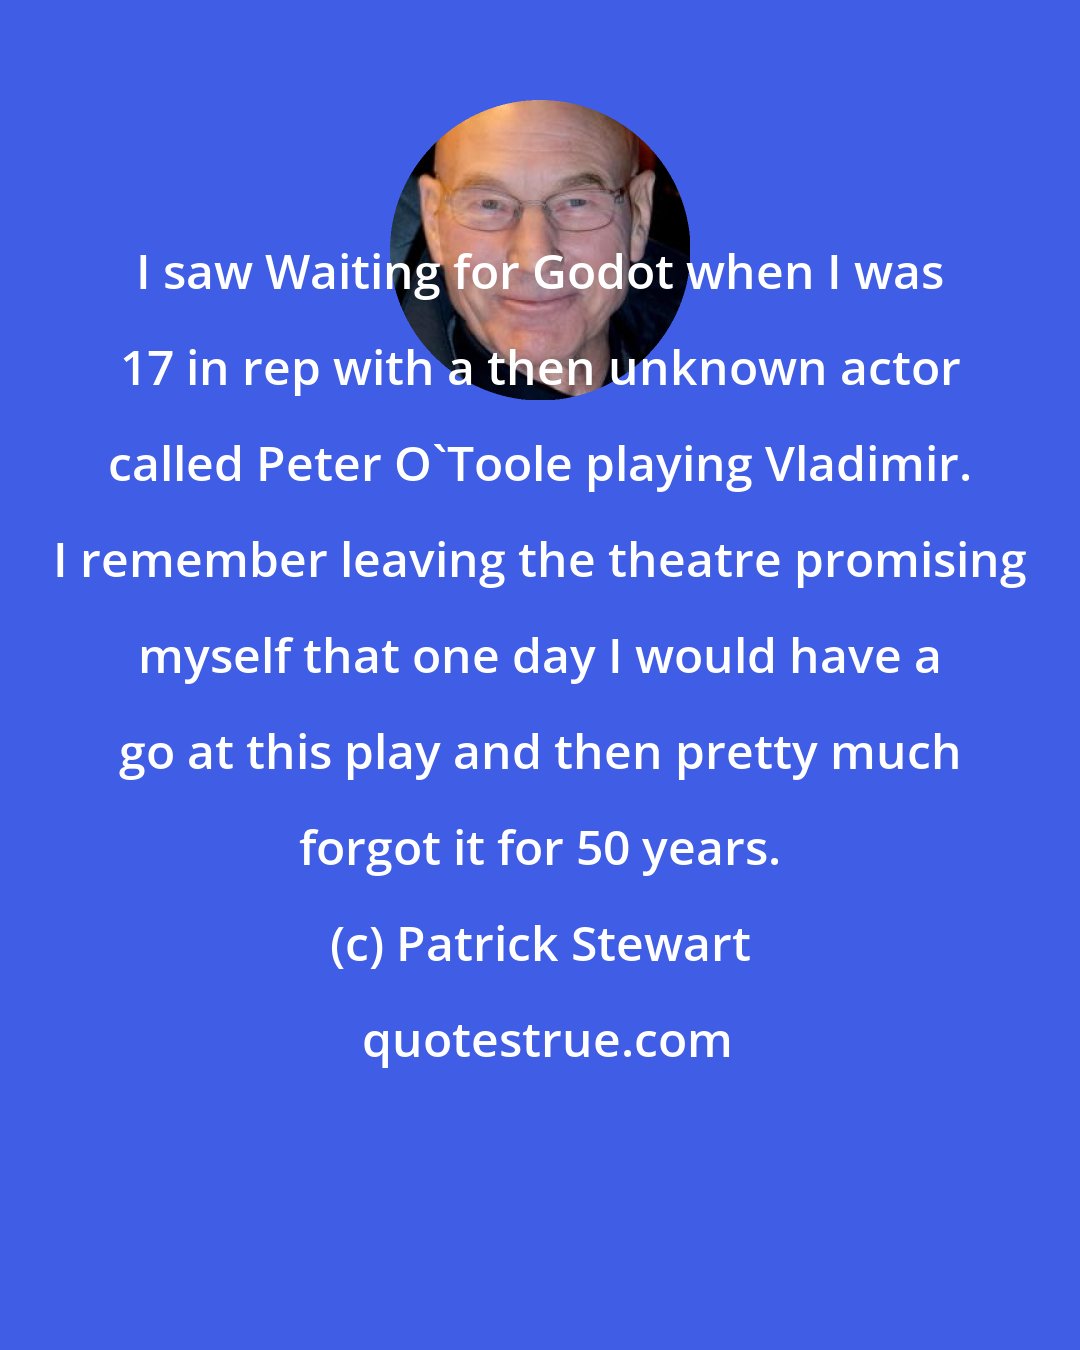 Patrick Stewart: I saw Waiting for Godot when I was 17 in rep with a then unknown actor called Peter O'Toole playing Vladimir. I remember leaving the theatre promising myself that one day I would have a go at this play and then pretty much forgot it for 50 years.